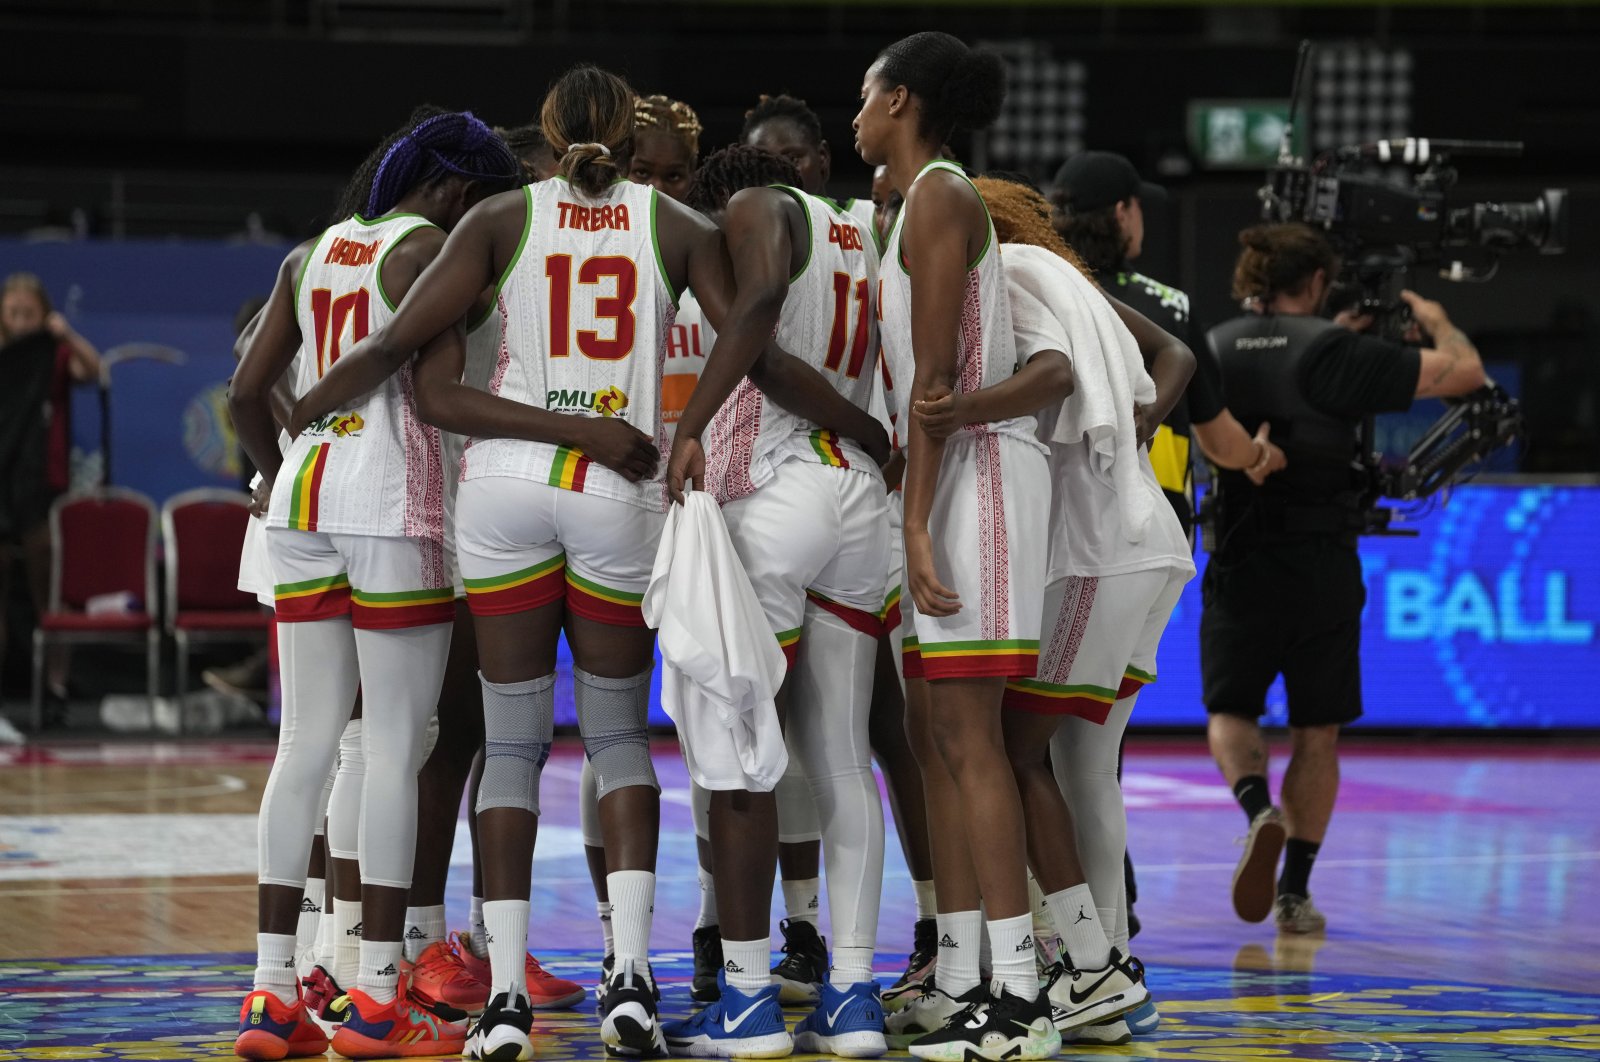 Mali players huddle together after their loss to Canada in their game at the women&#039;s Basketball World Cup in Sydney, Australia, Sept. 27, 2022. (AP Photo)